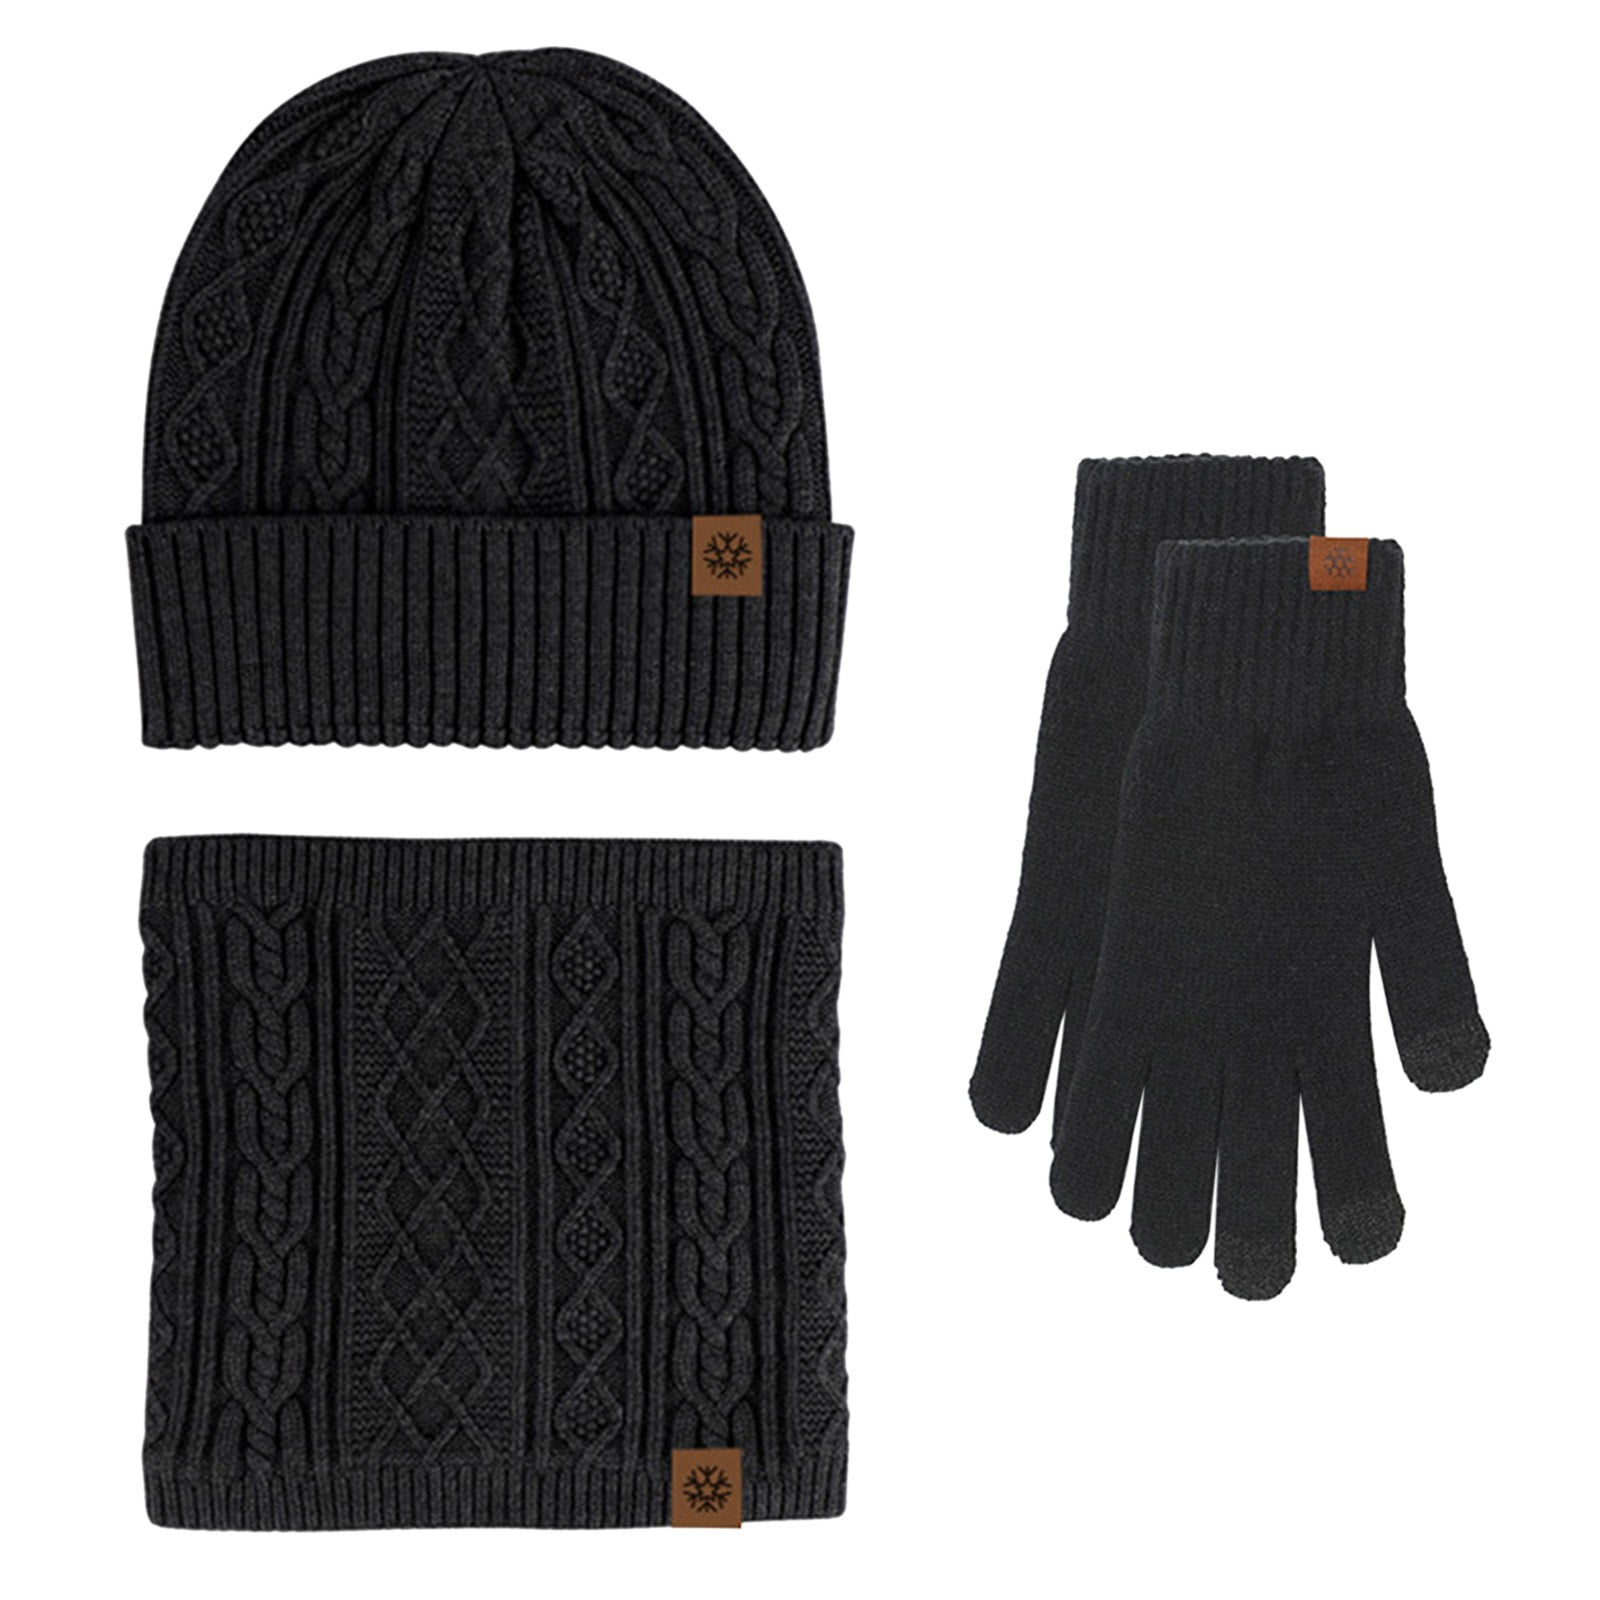 Hats, neck warmers and gloves Aftco buy on